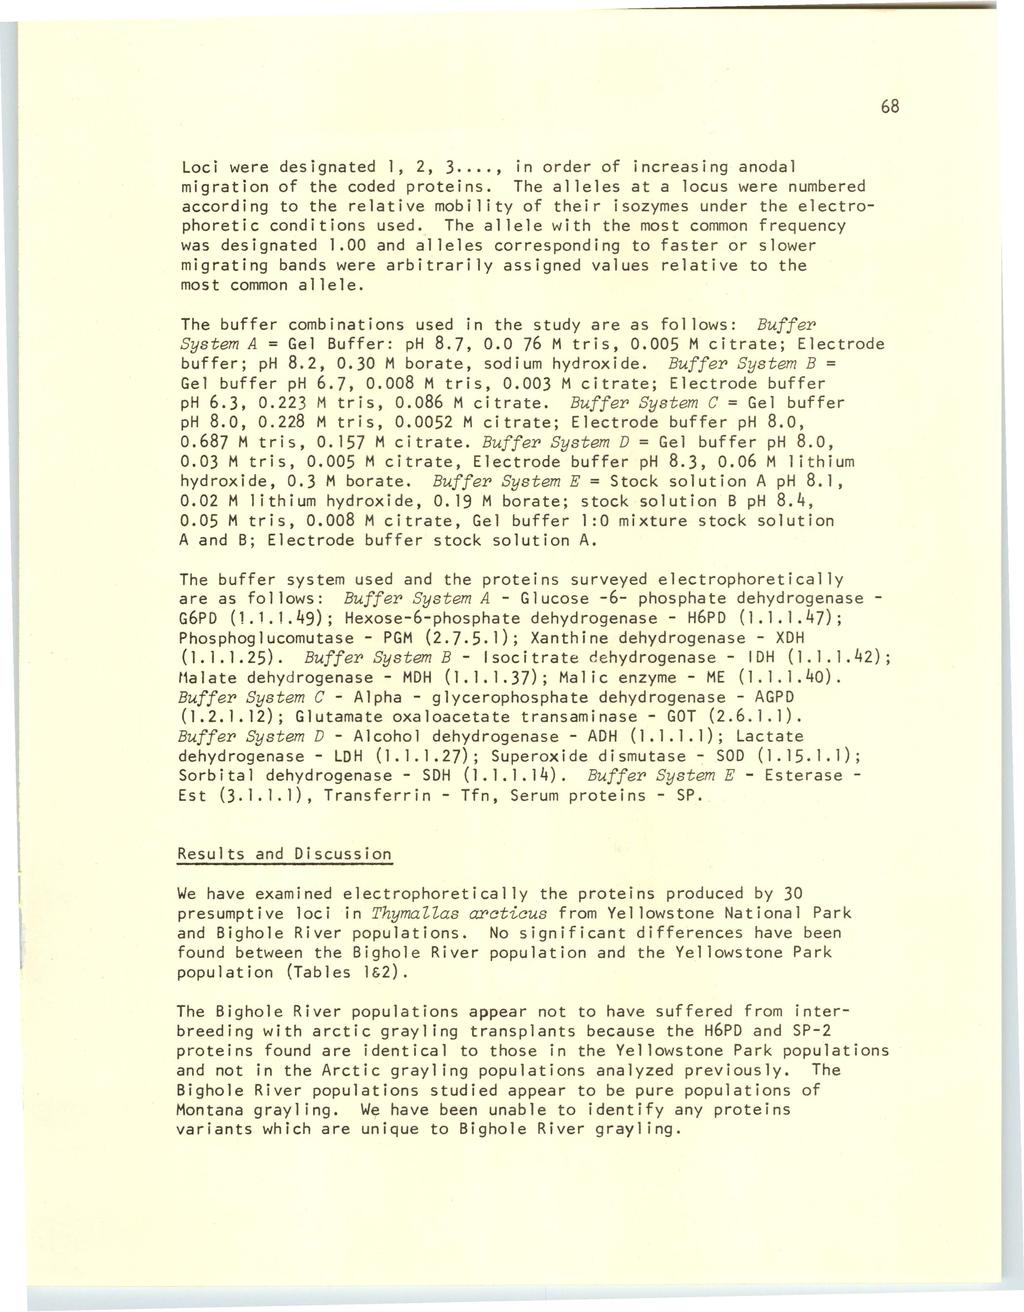 University of Wyoming National Park Service Research Center Annual Report, Vol. 1 [1977], Art. 19 68 Loci were designated l, 2, 3..., in order of increasing anodal migration of the coded proteins.